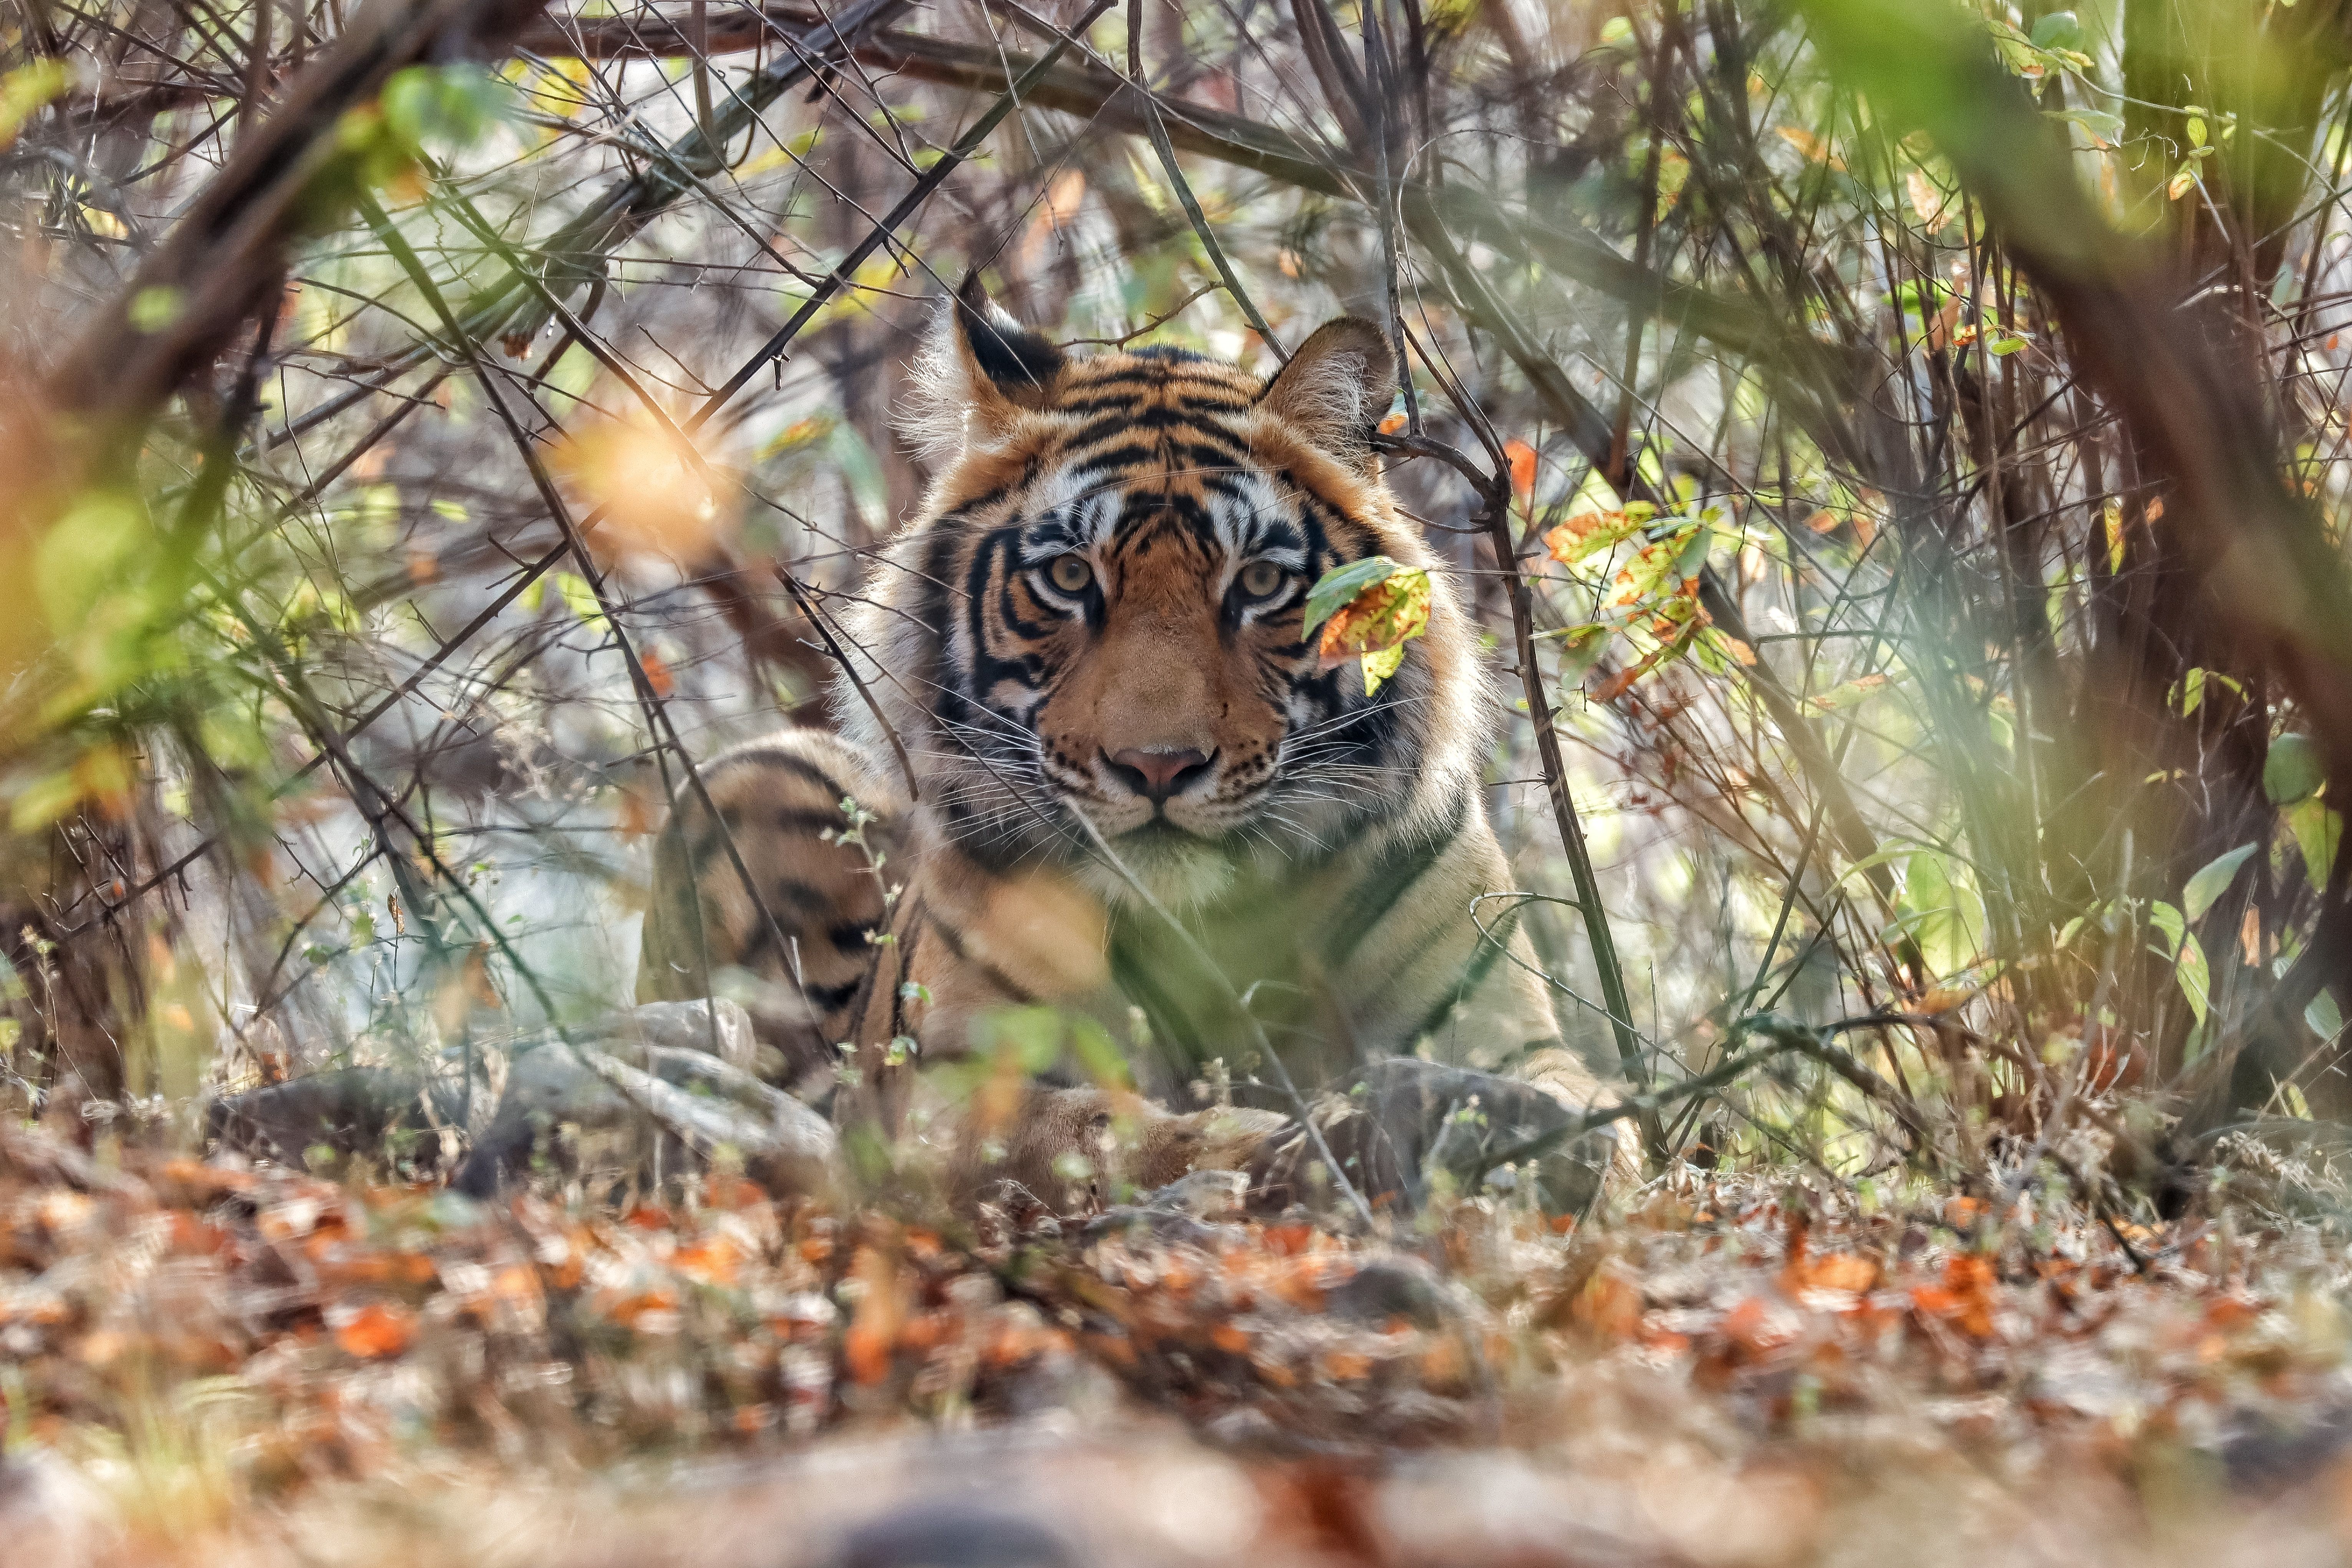 A tiger rests in Kanha National Park, India 